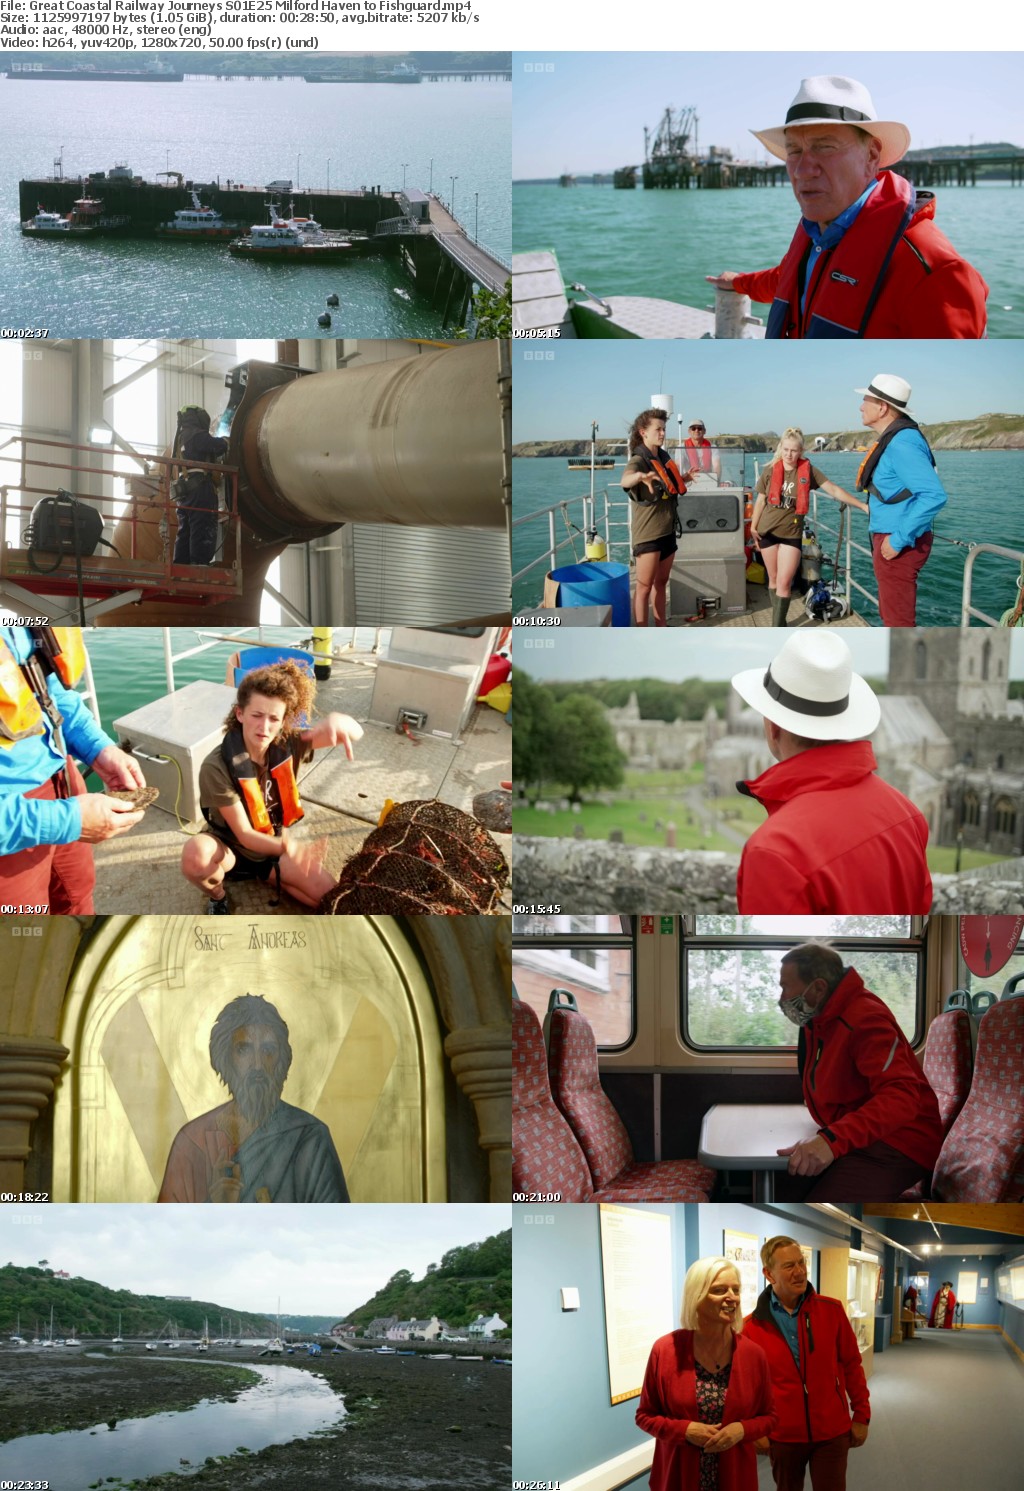 Great Coastal Railway Journeys S01E25 Milford Haven to Fishguard (1280x720p HD, 50fps, soft Eng subs)